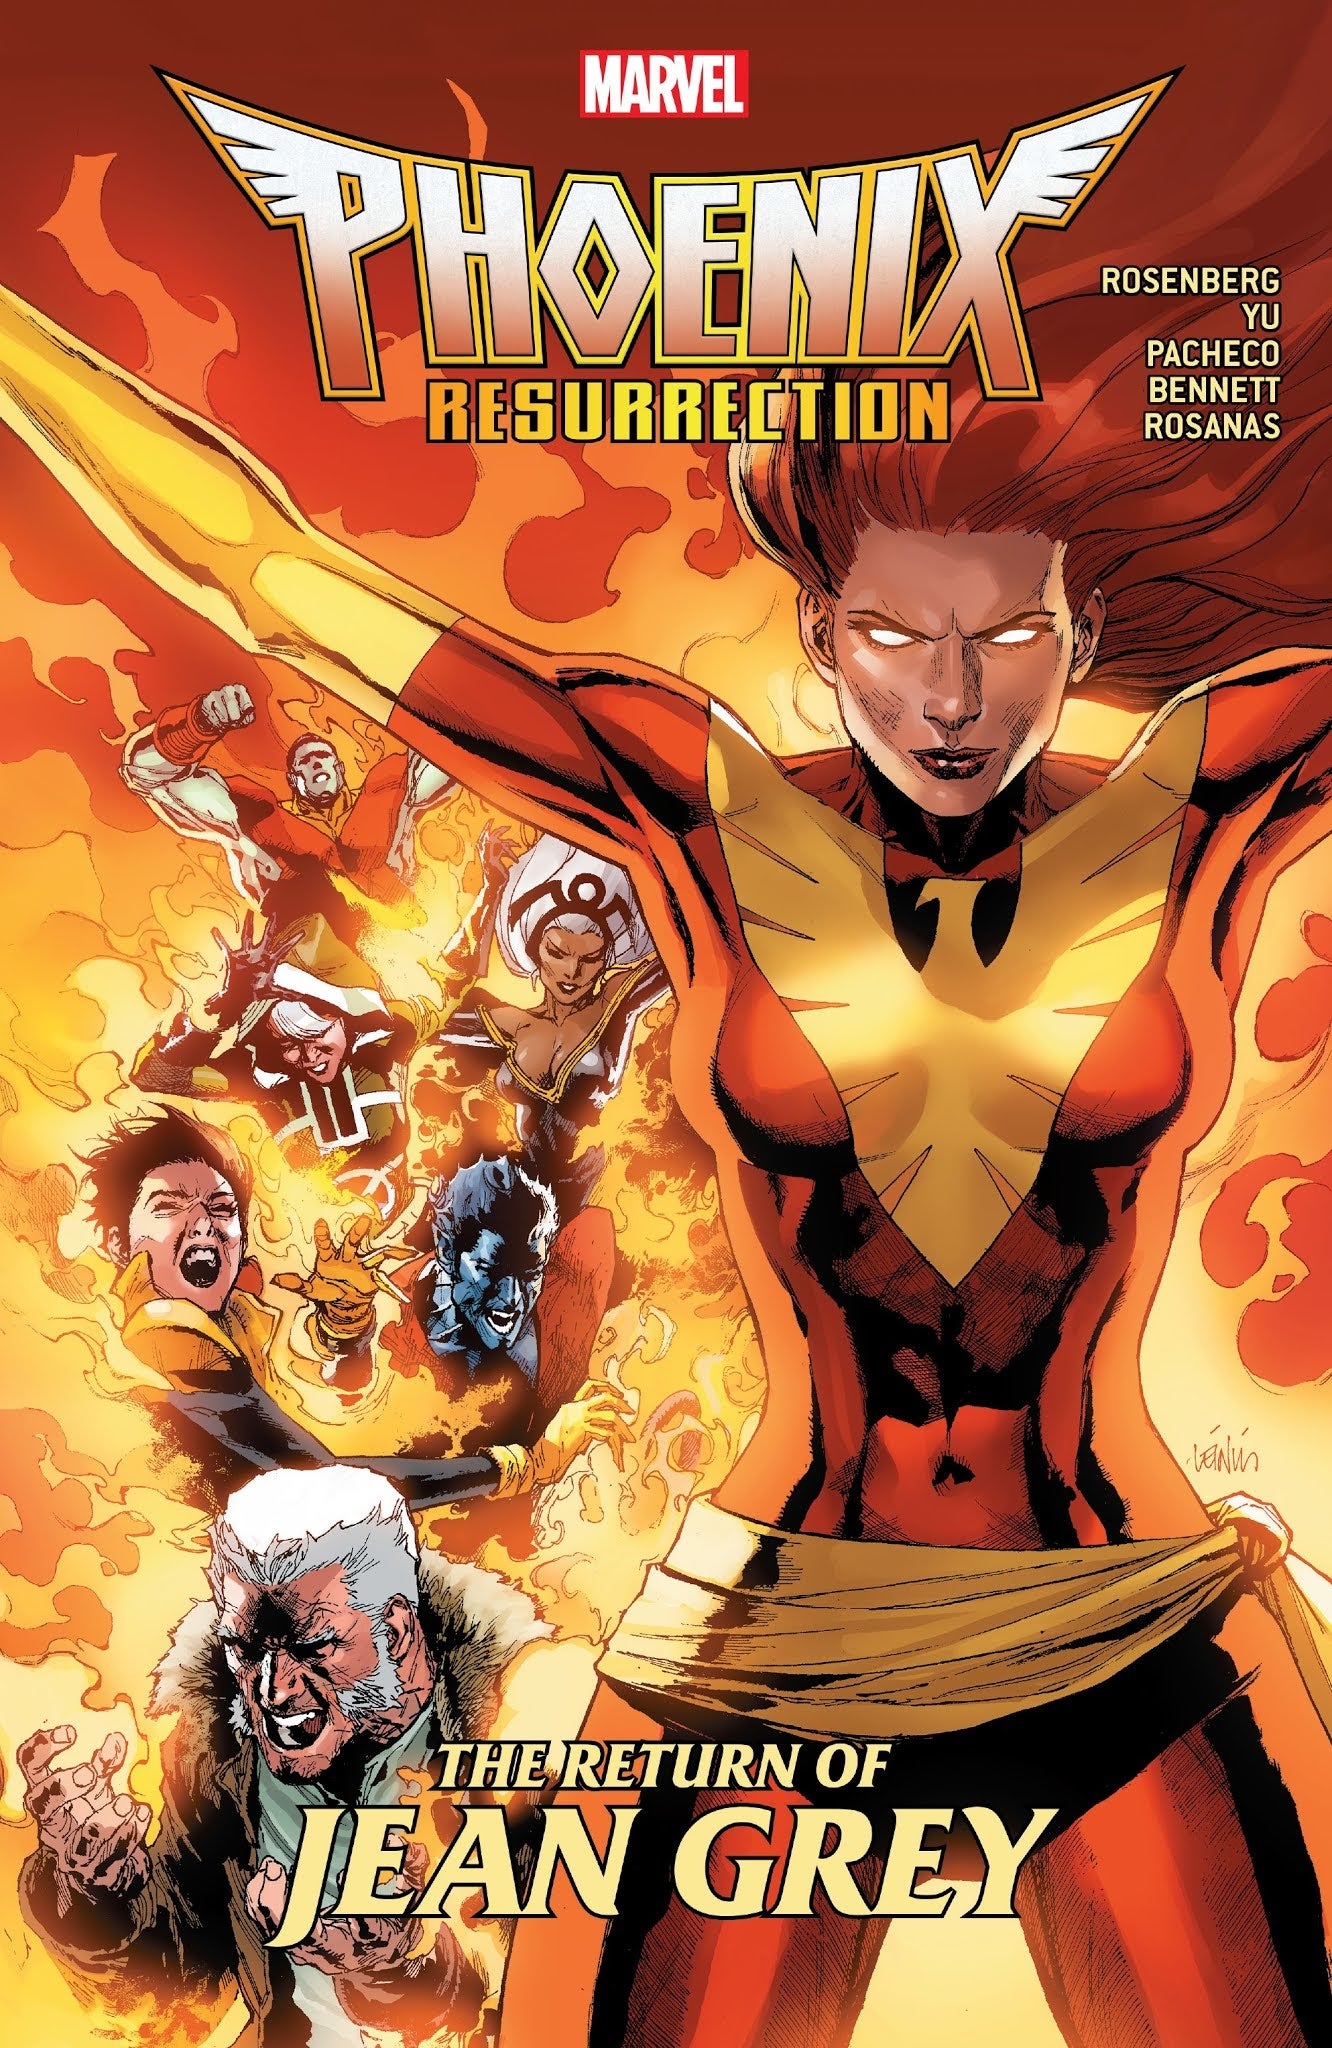 Cover of Phoenix resurrection featuring Jean Grey